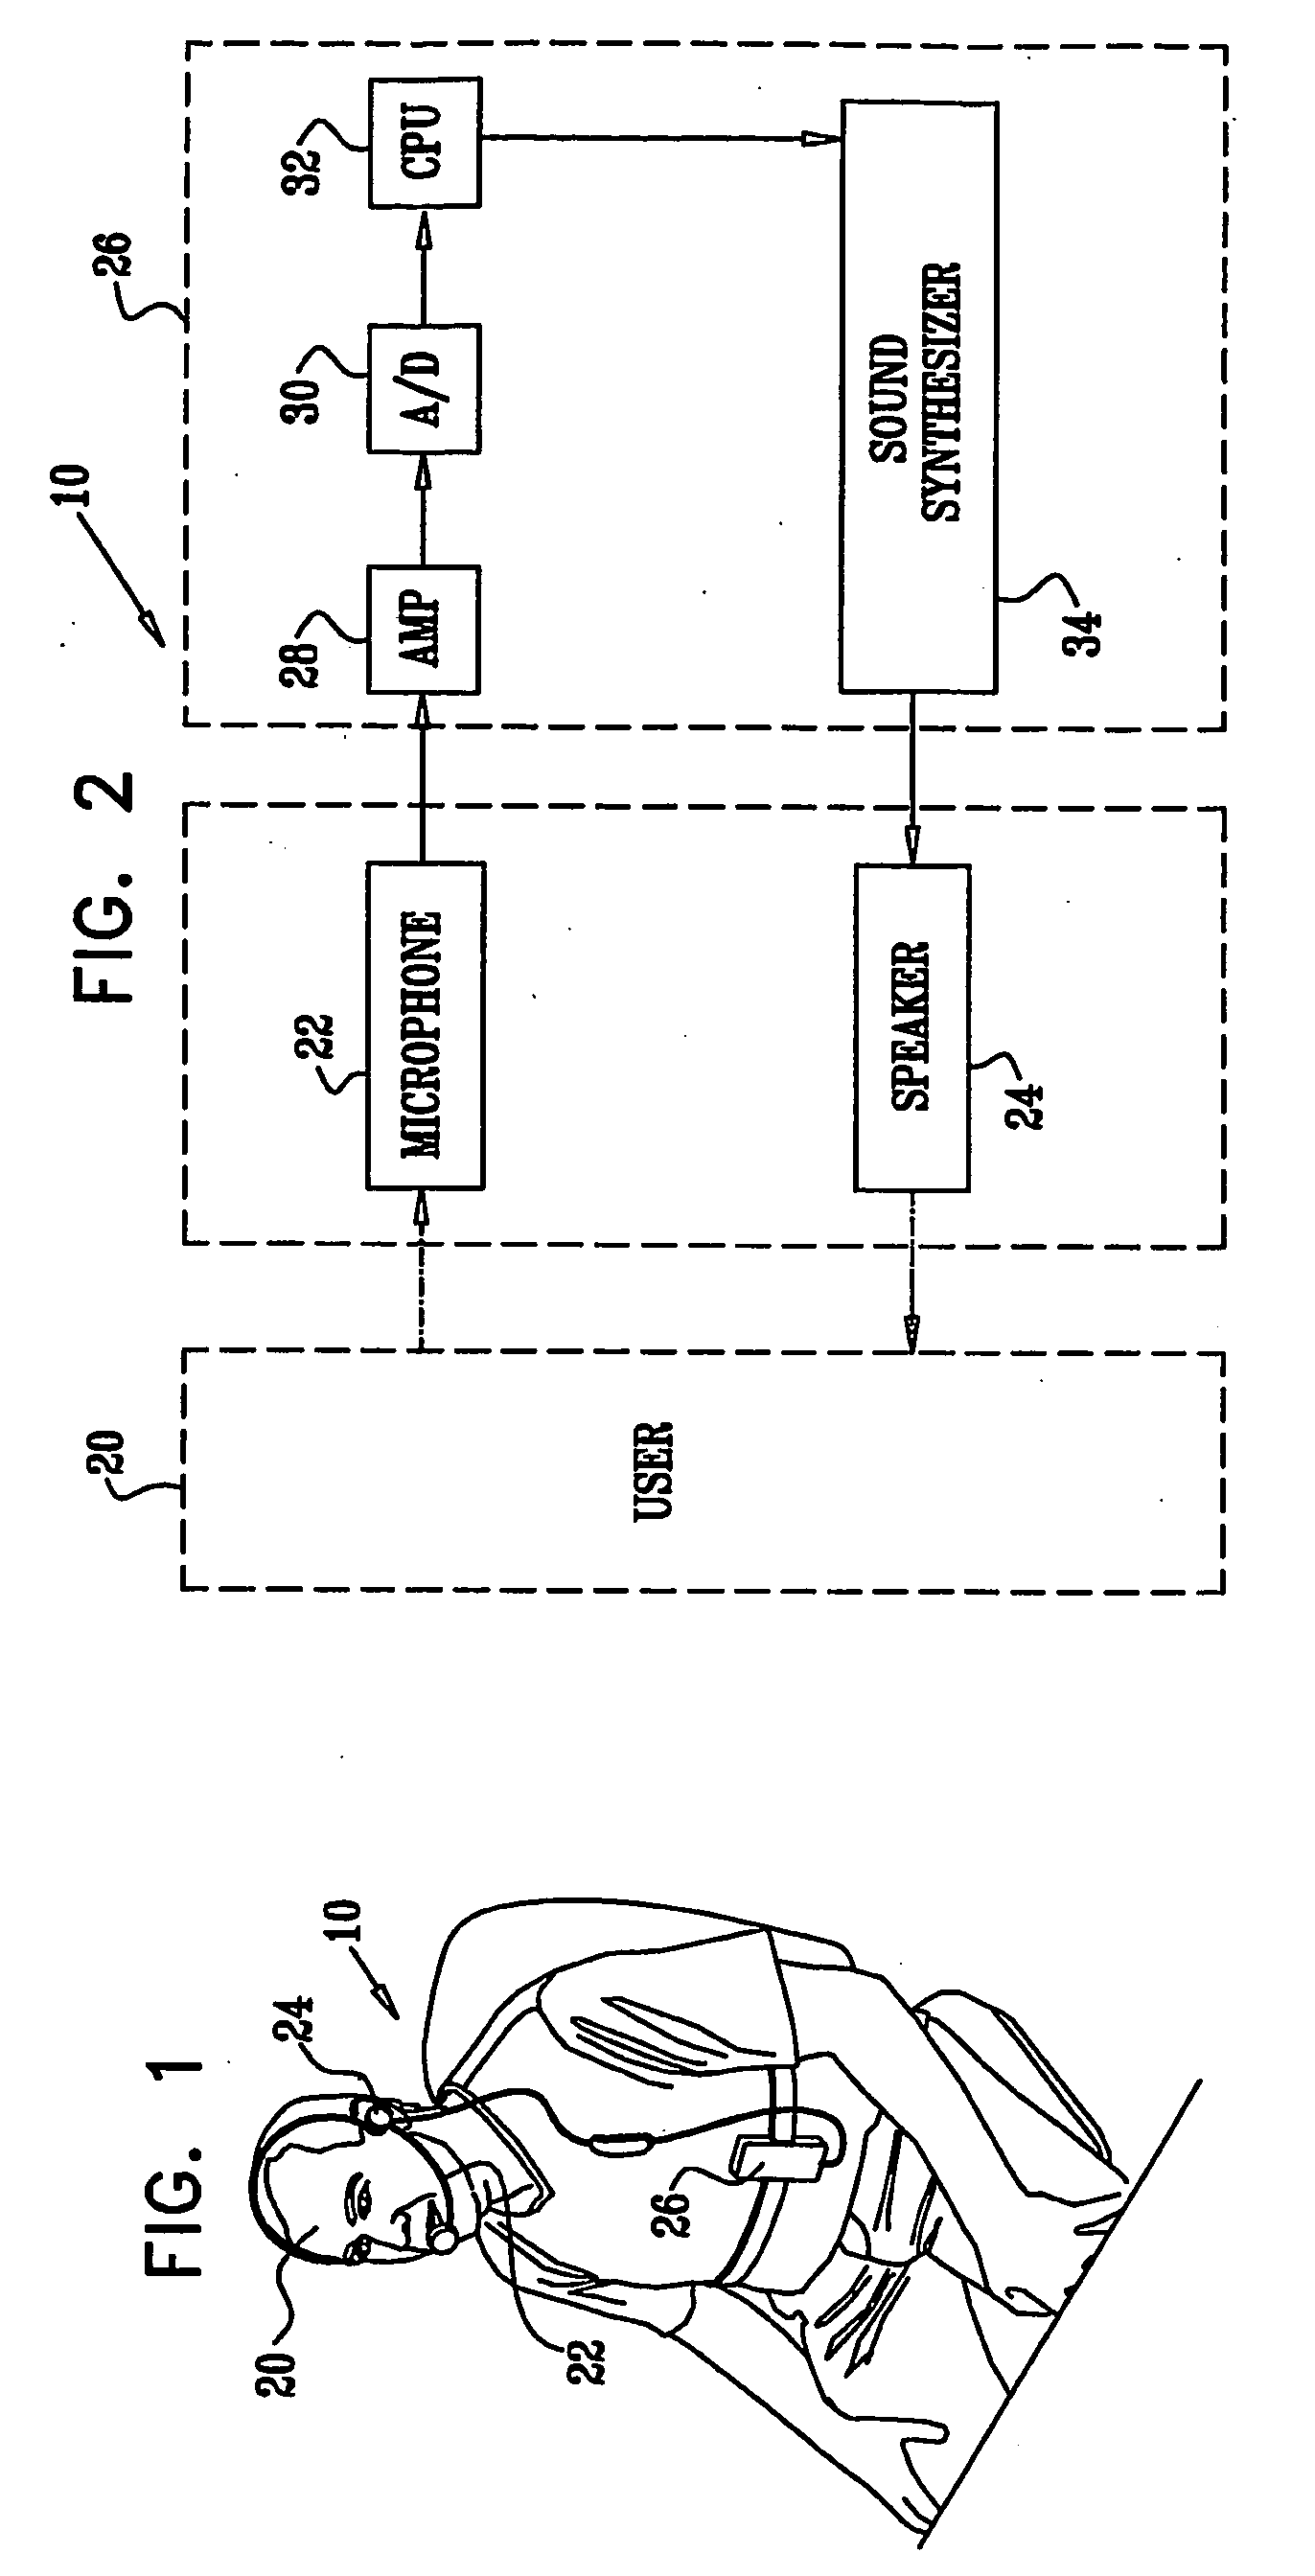 Apparatus and Method for Breathing Pattern Determination Using a Non-Contact Microphone